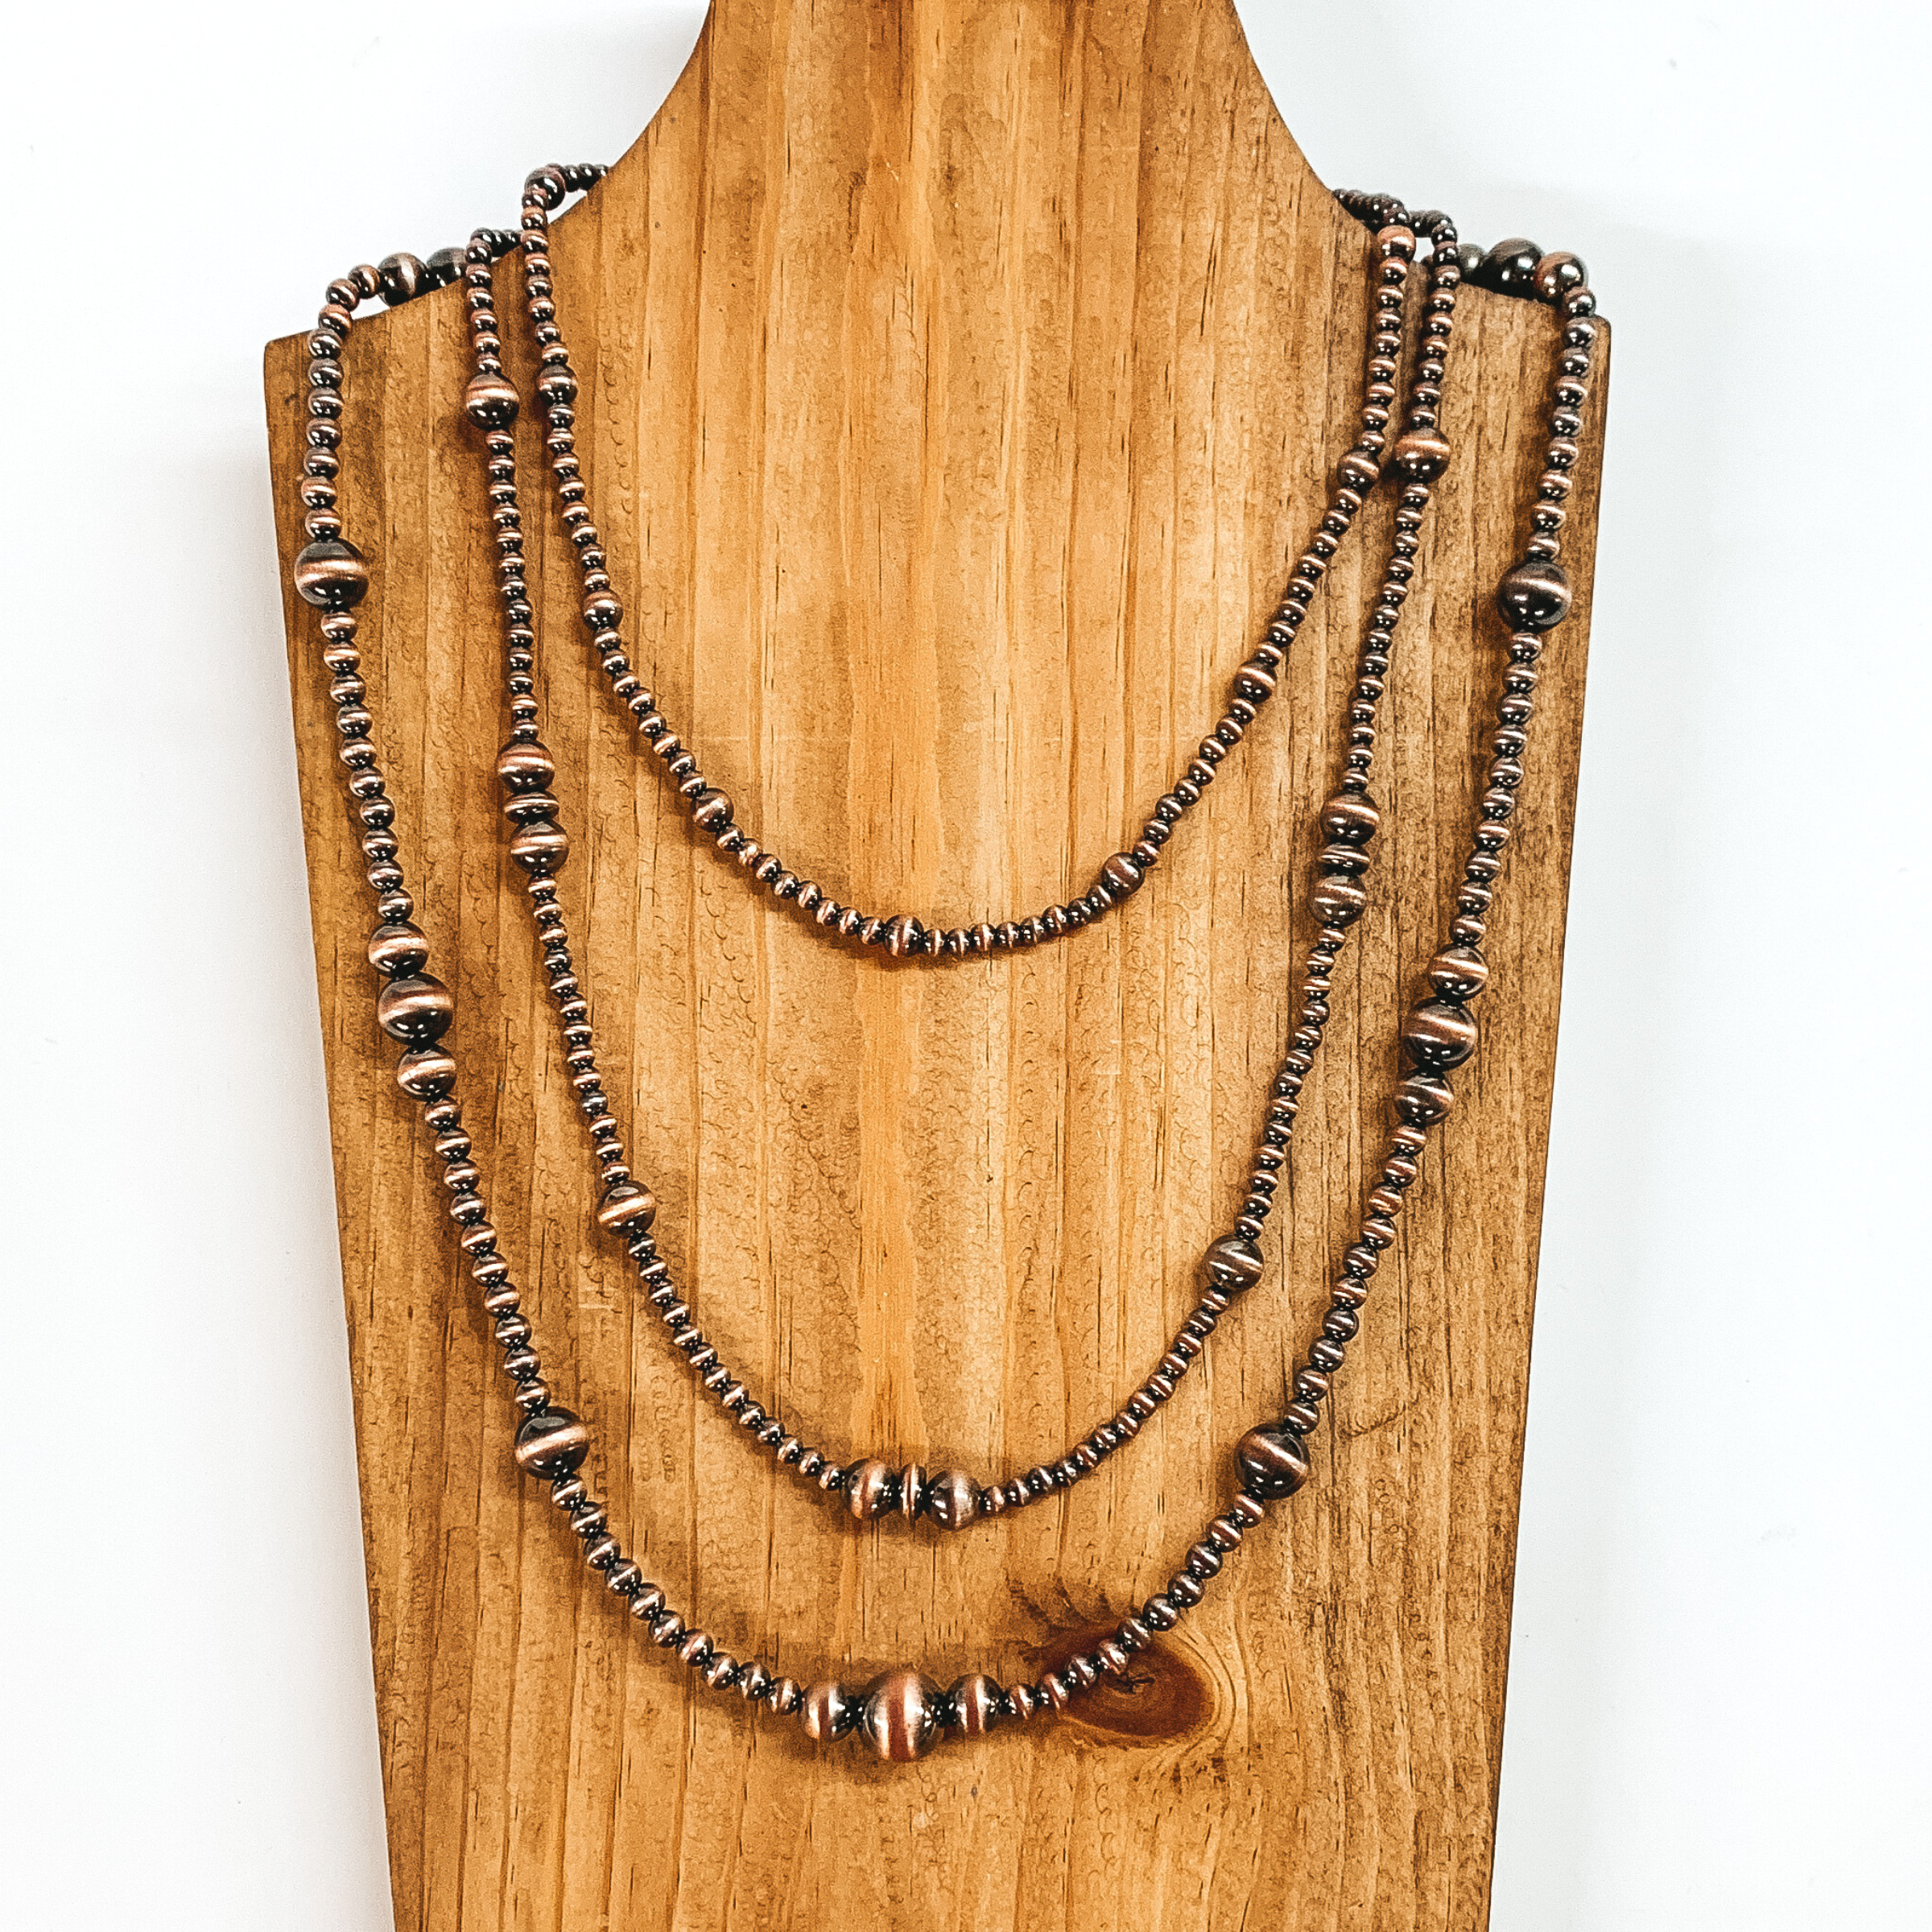 Three Strand Necklace of Faux Navajo Pearls with Graduated Pearls in Copper Tone - Giddy Up Glamour Boutique